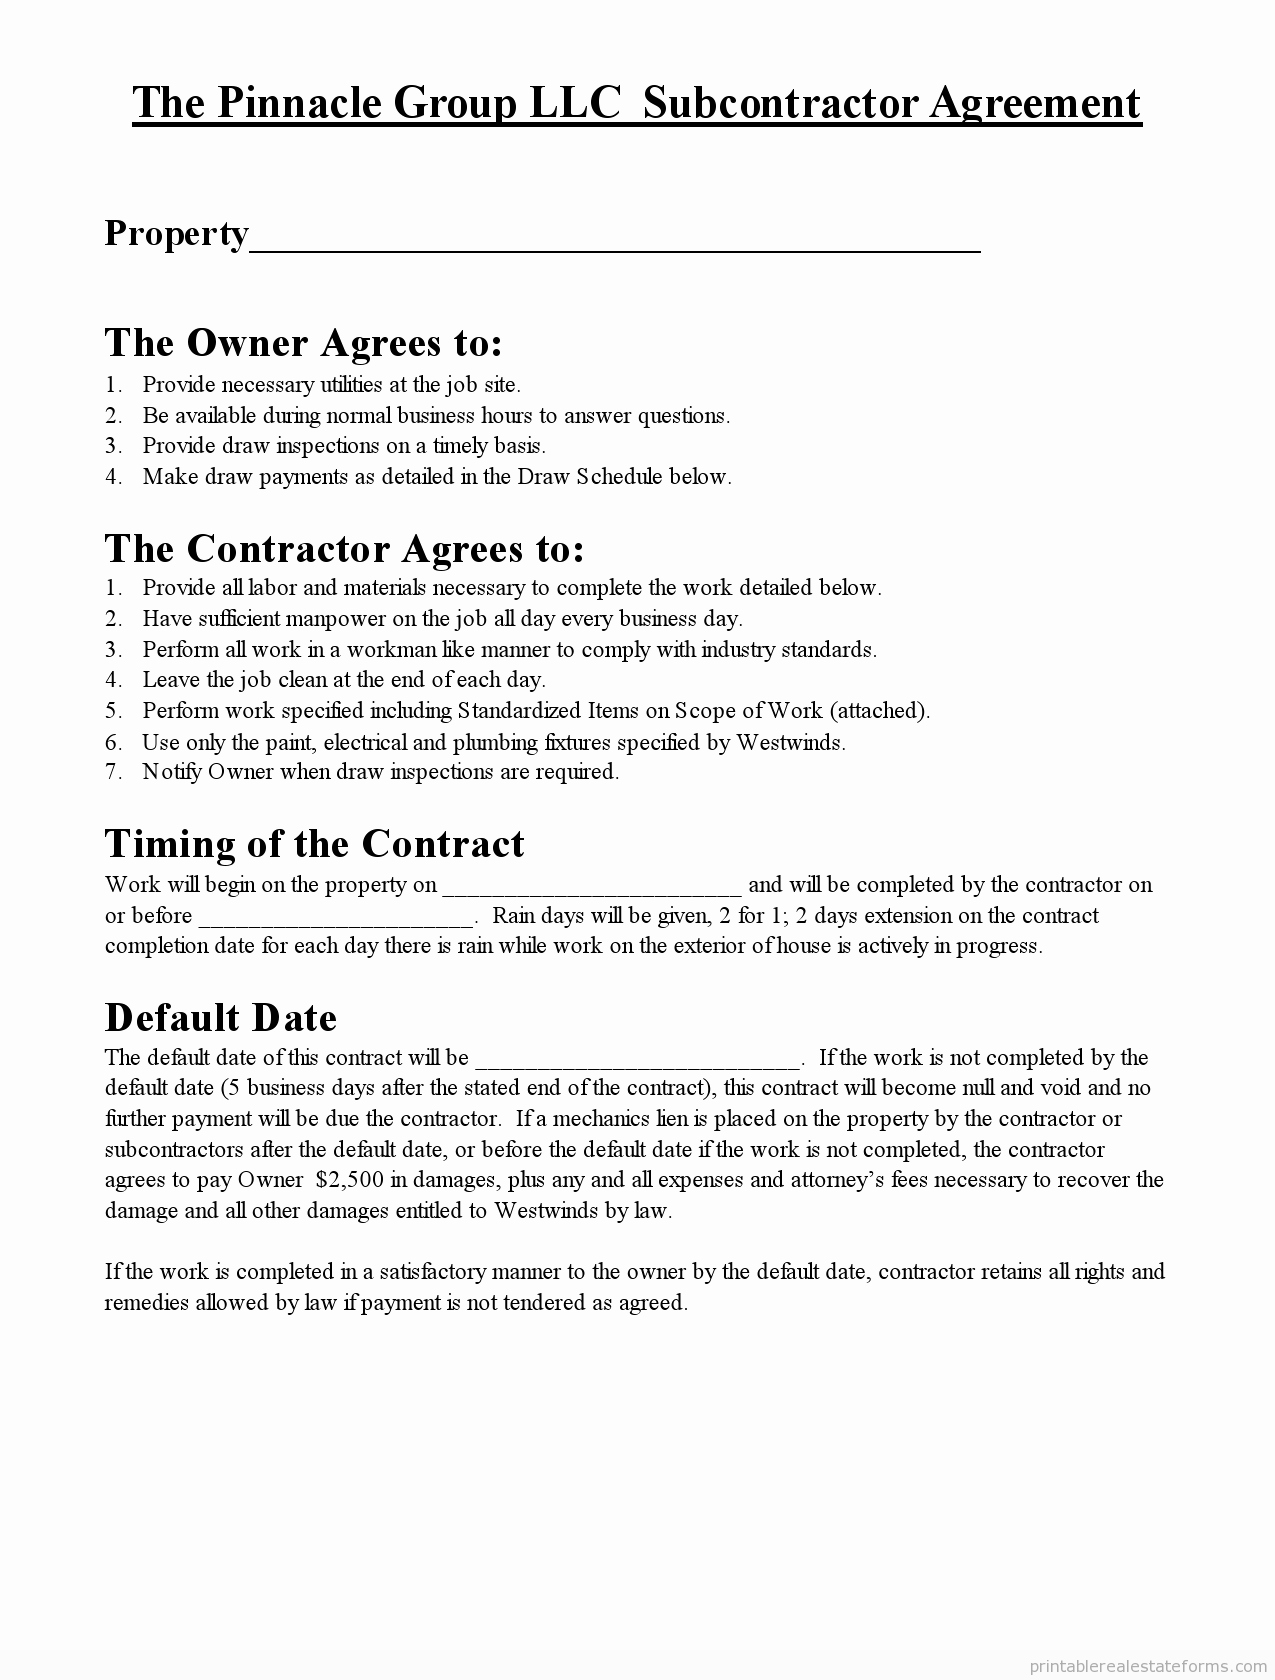 Free Printable Subcontractor Agreement form